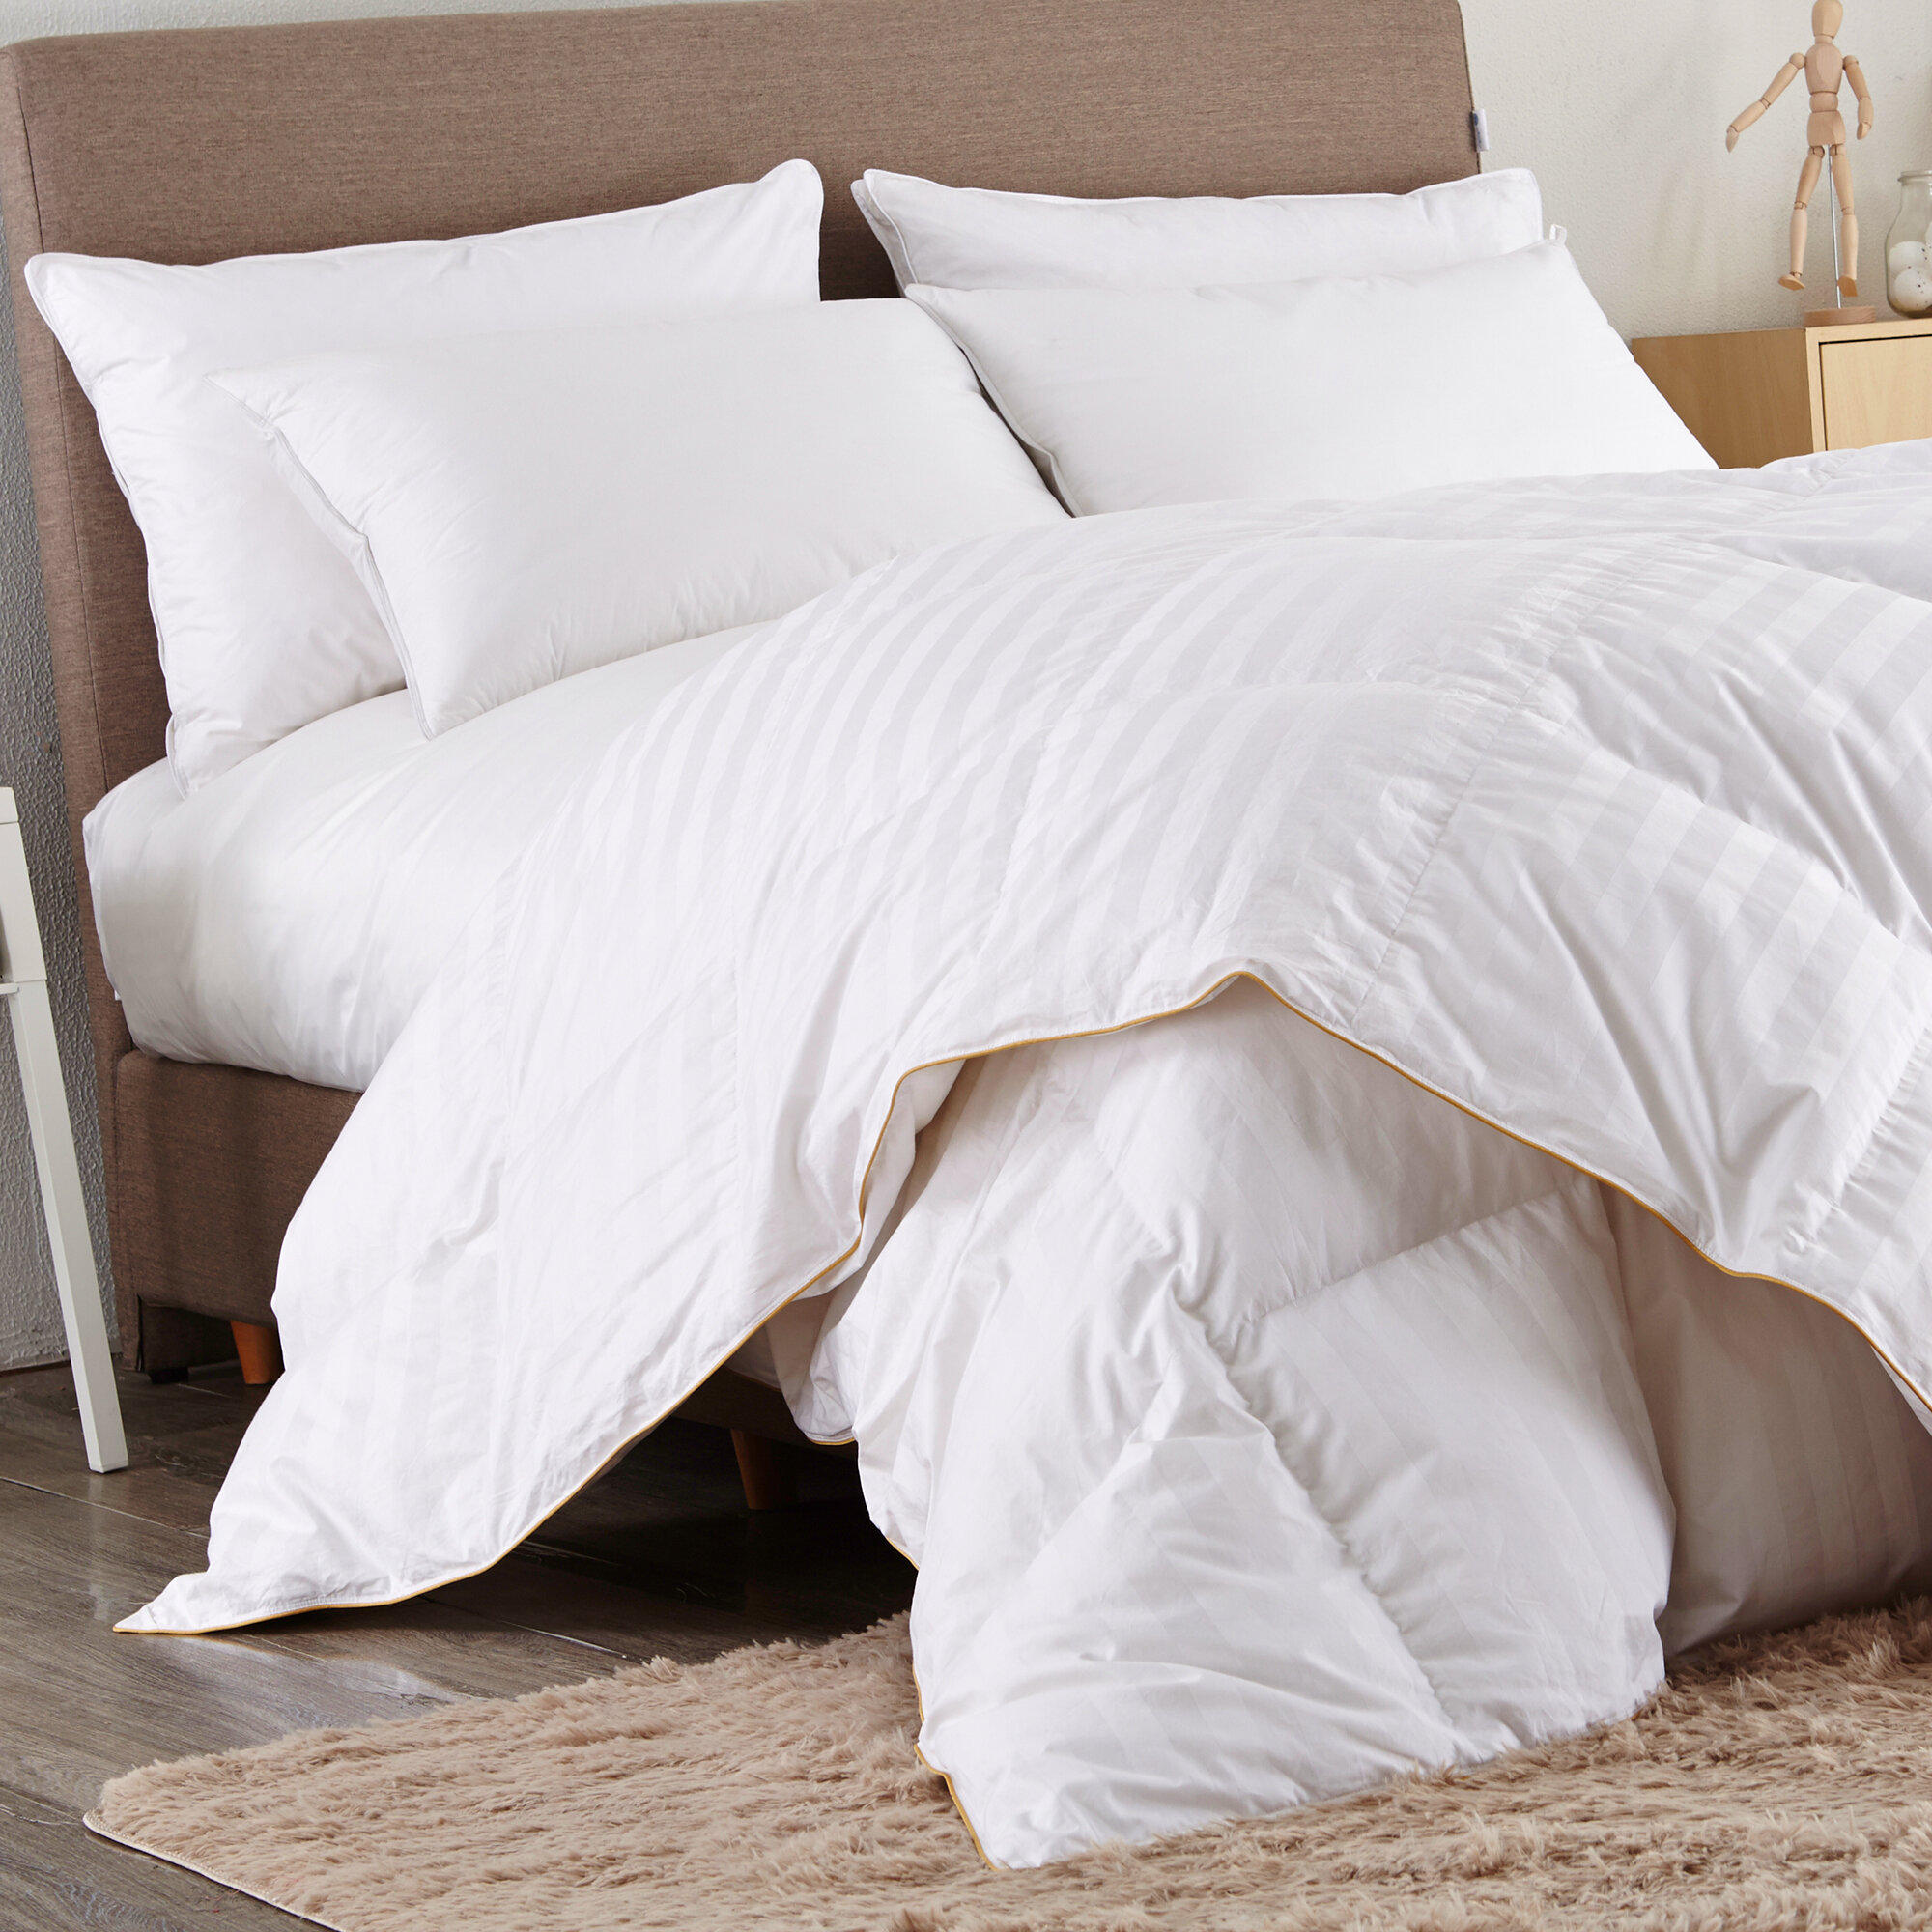 Colored Down Comforters Duvet Inserts You Ll Love In 2021 Wayfair